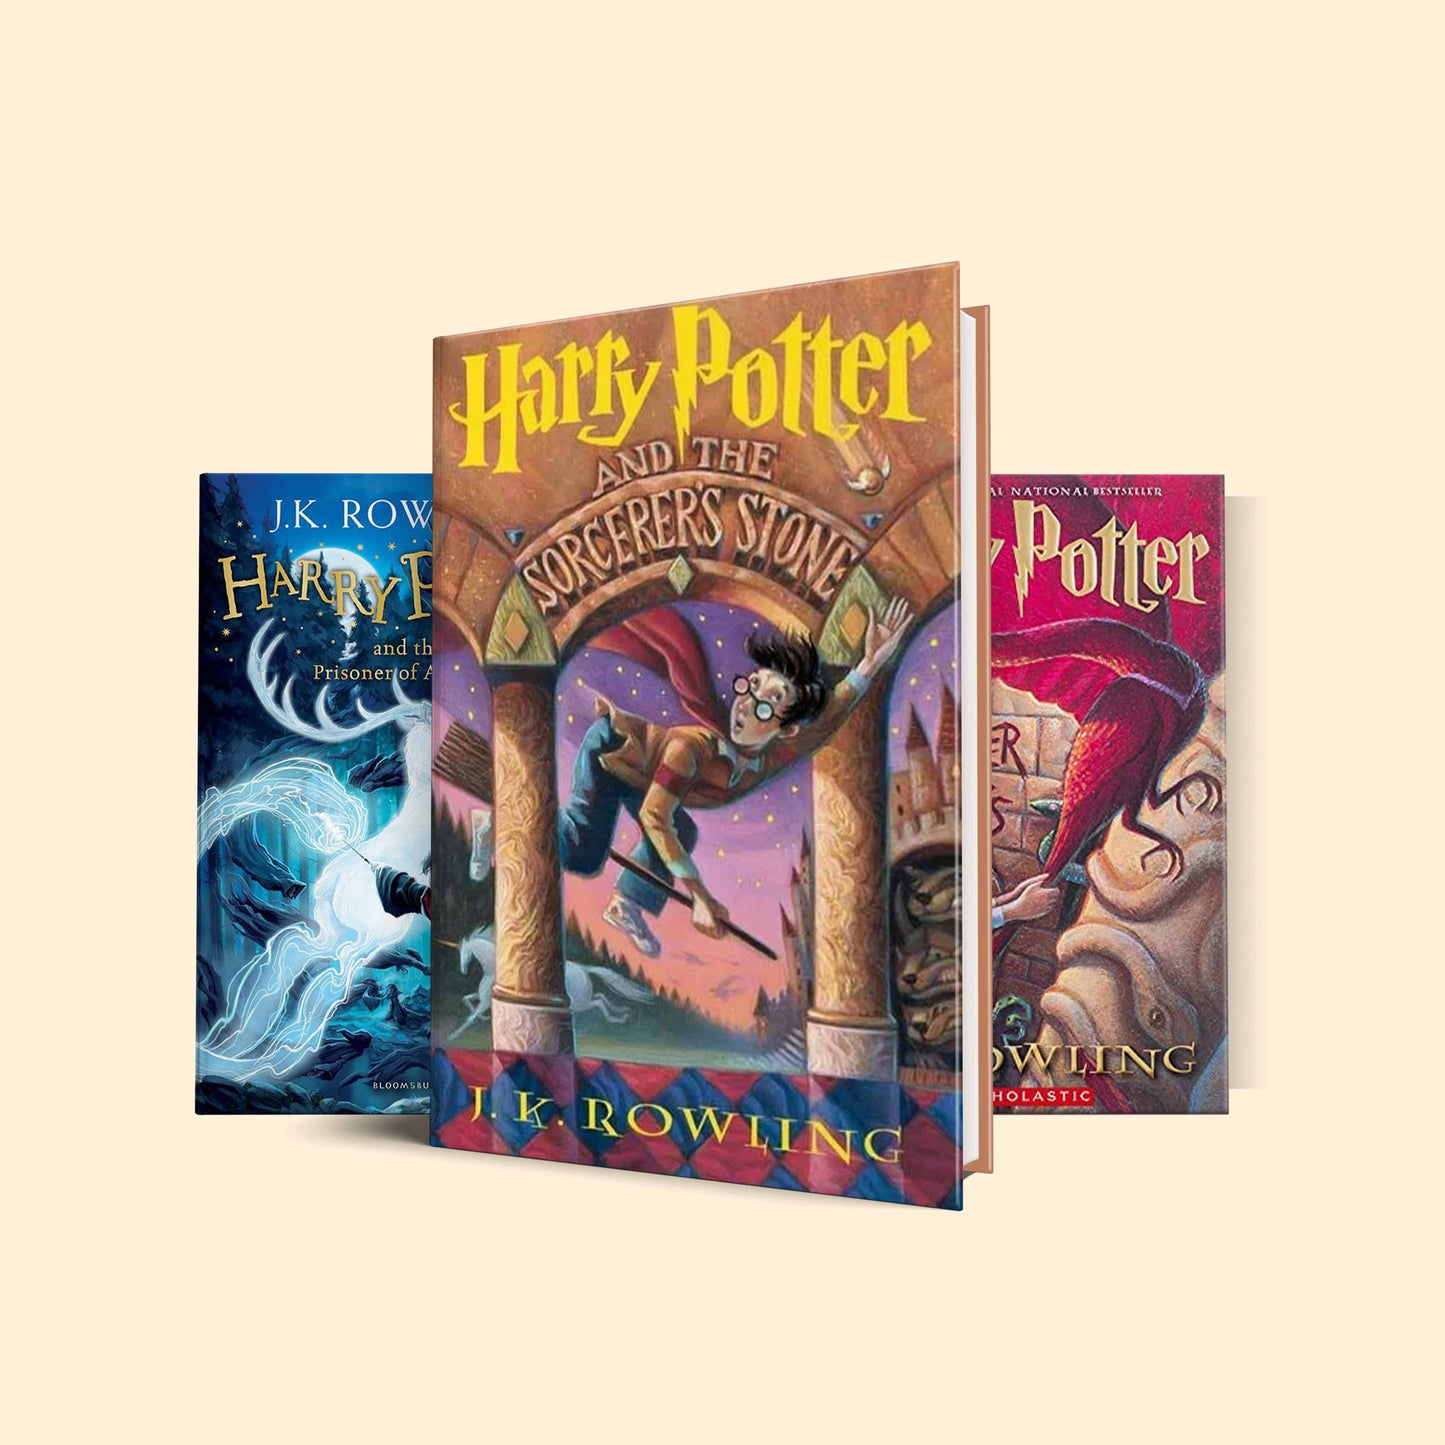 Harry Potter Book set 1( Harry Potter and the Sorcerer's Stone, Harry Potter and the Chamber of Secrets, Harry Potter and the Prisoner of Azkaban)